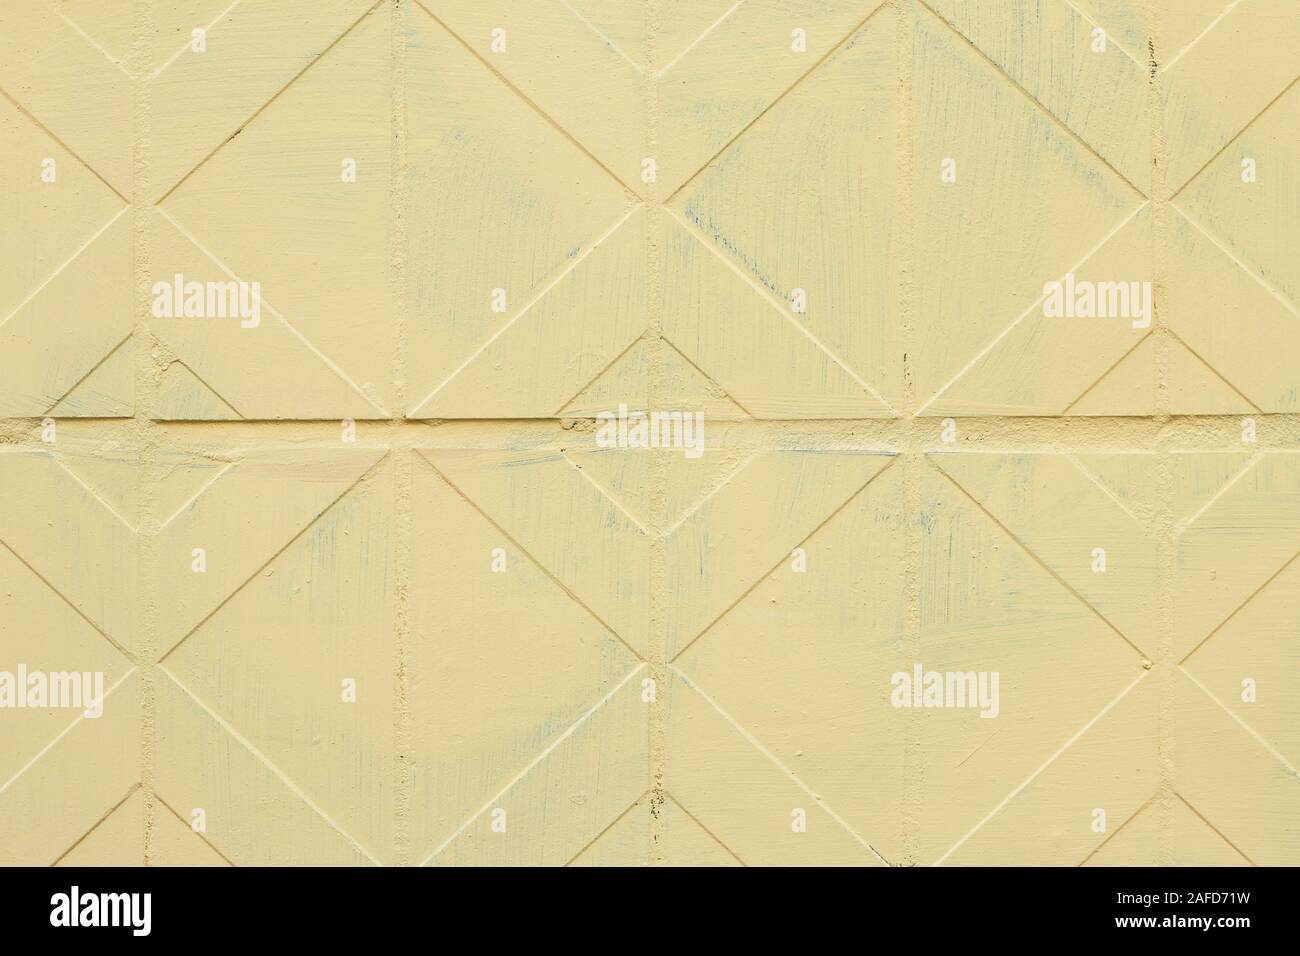 Geometric tile ornament on the wall. Decorative yellow tiles in shape square and rhombus. Vintage facade, background texture, floor pattern Stock Photo